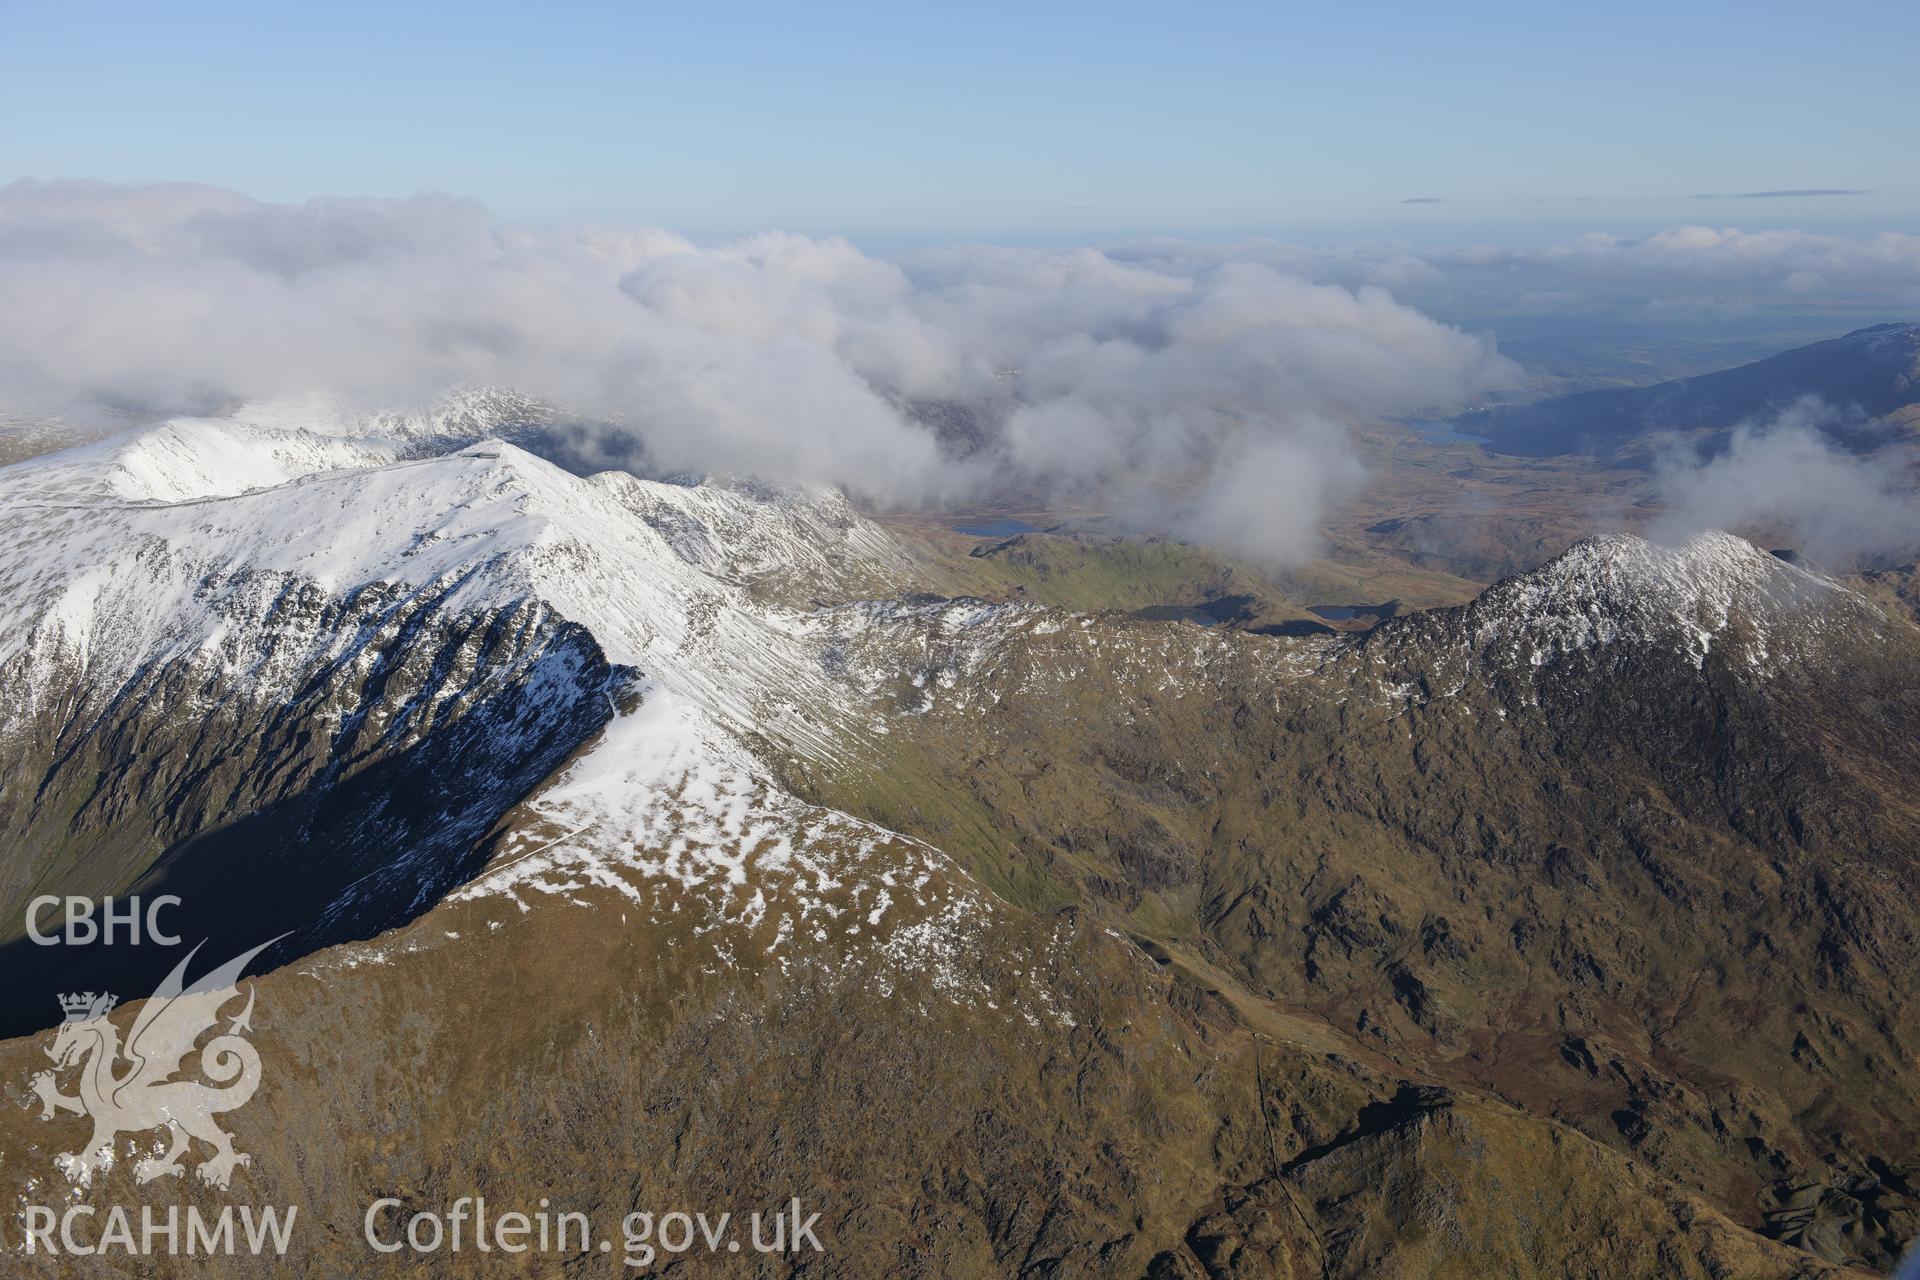 RCAHMW colour oblique photograph of Snowdon summit under snow, view over Bwlch Main. Taken by Toby Driver on 10/12/2012.